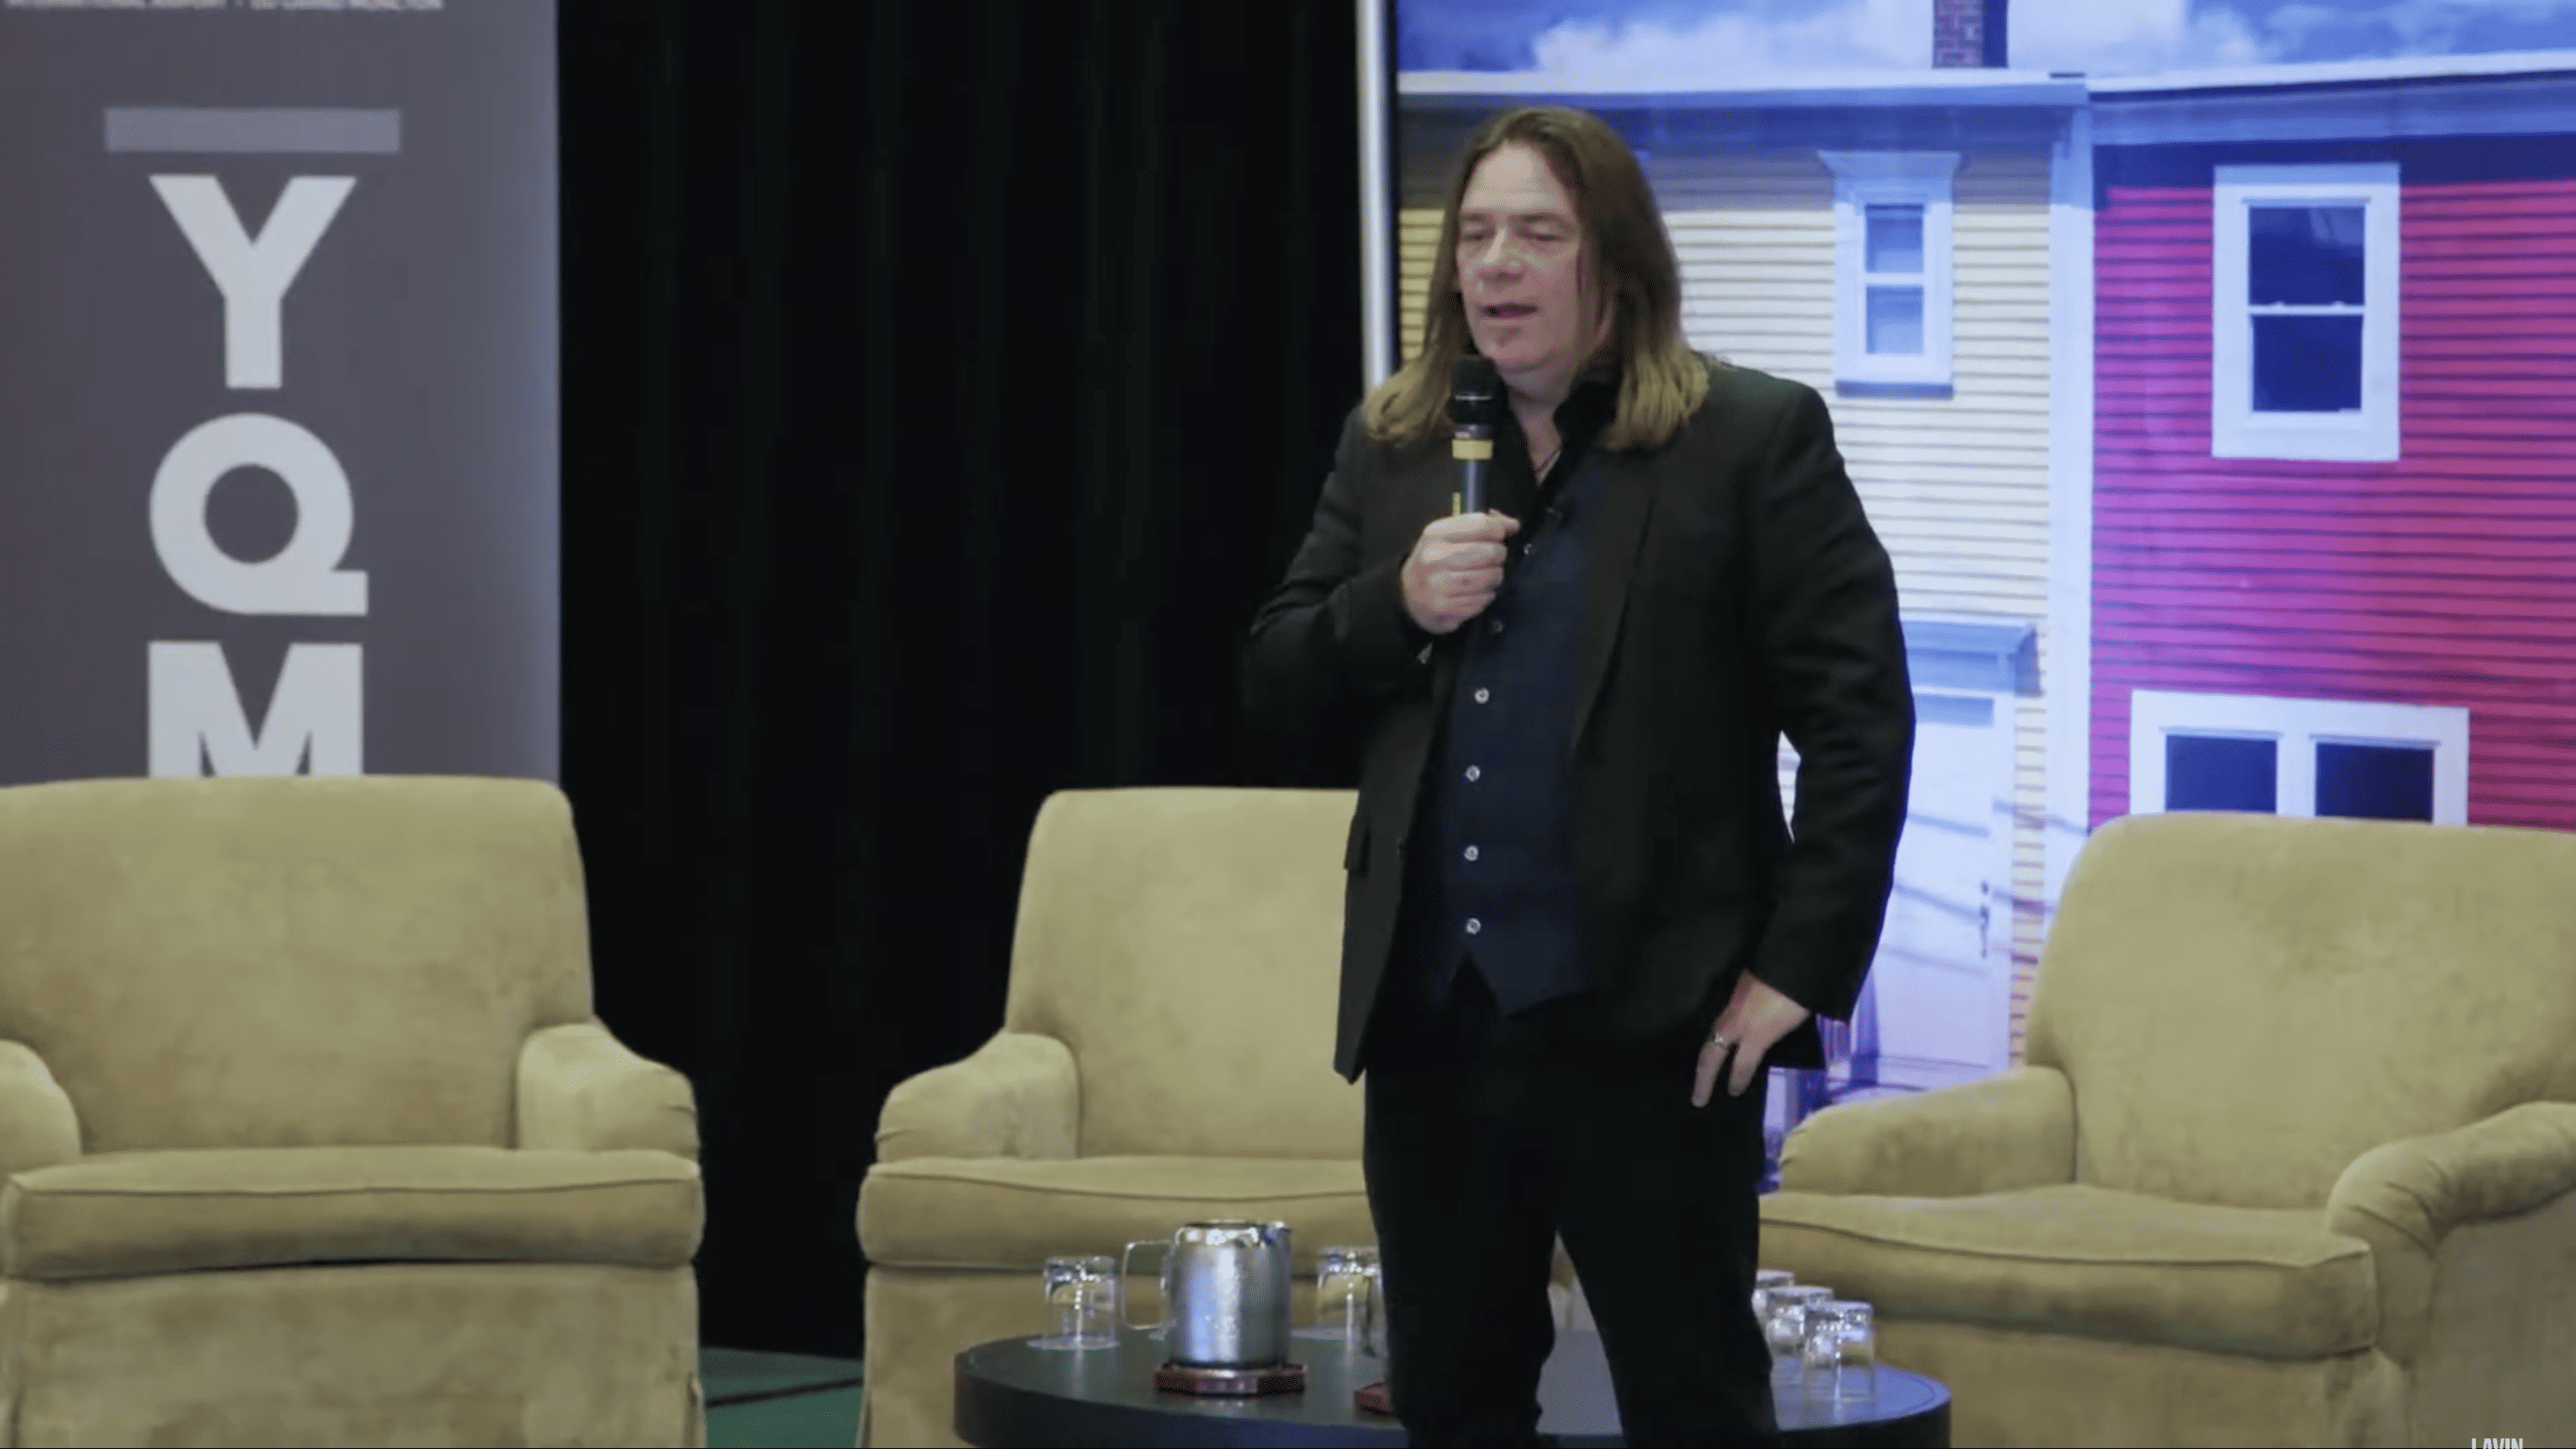 Alan Doyle, a light-skinned man with brown hair, giving a talk onstage.